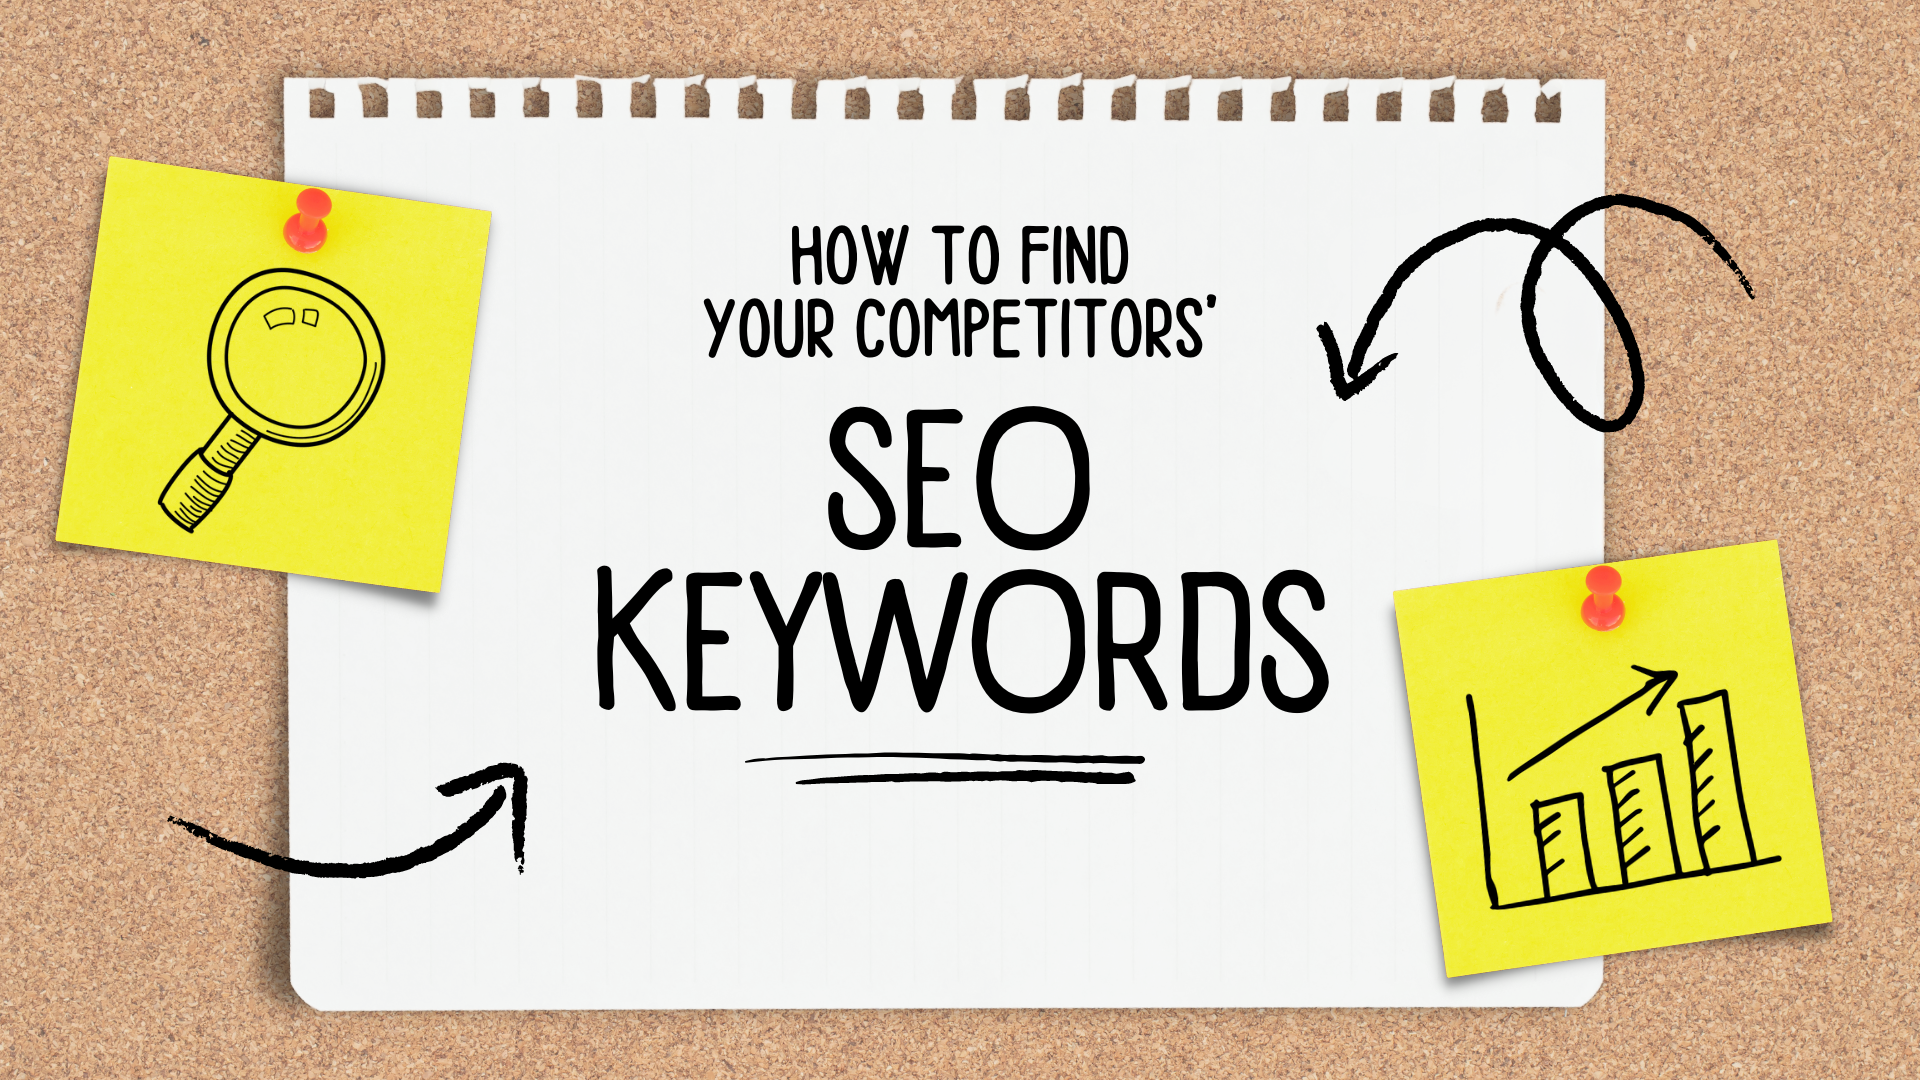 How to Find Competitors' Keywords SEO